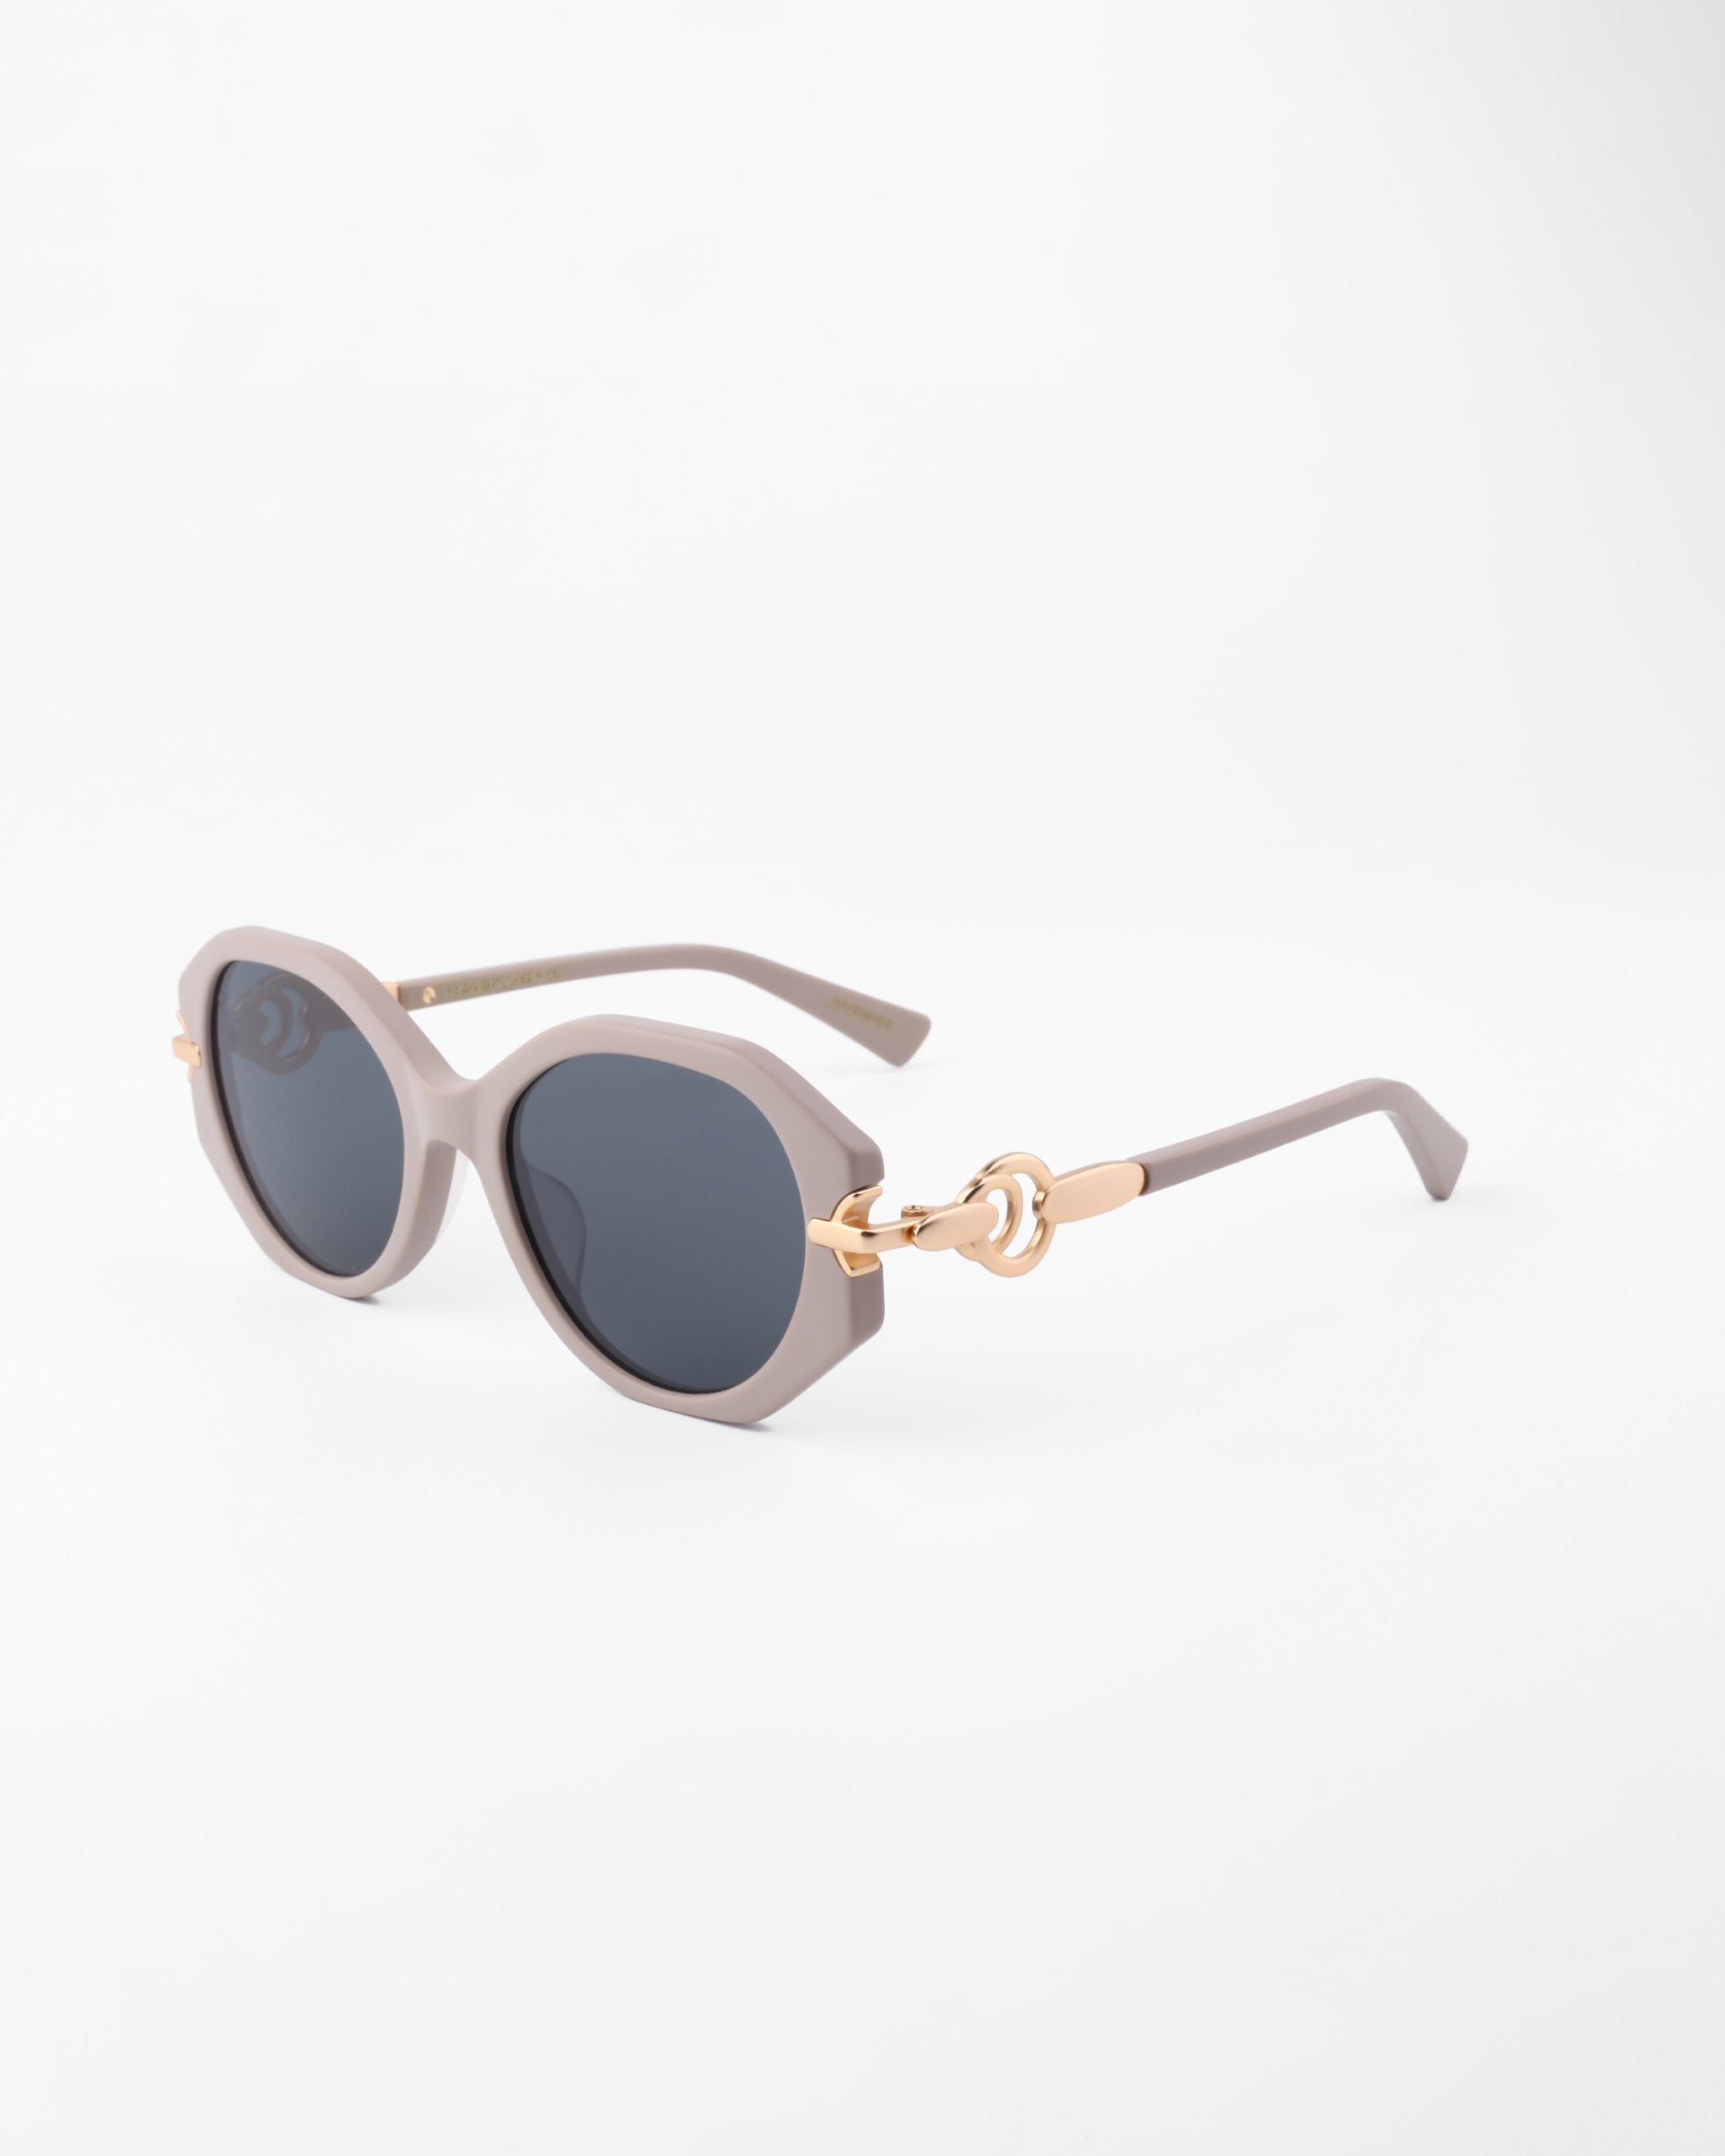 A pair of stylish Seaside, round sunglasses with dark, shatter-resistant lenses and light grey handmade acetate frames from For Art&#39;s Sake®. The arms feature a decorative gold-colored accent near the hinges. They are placed on a plain white surface.